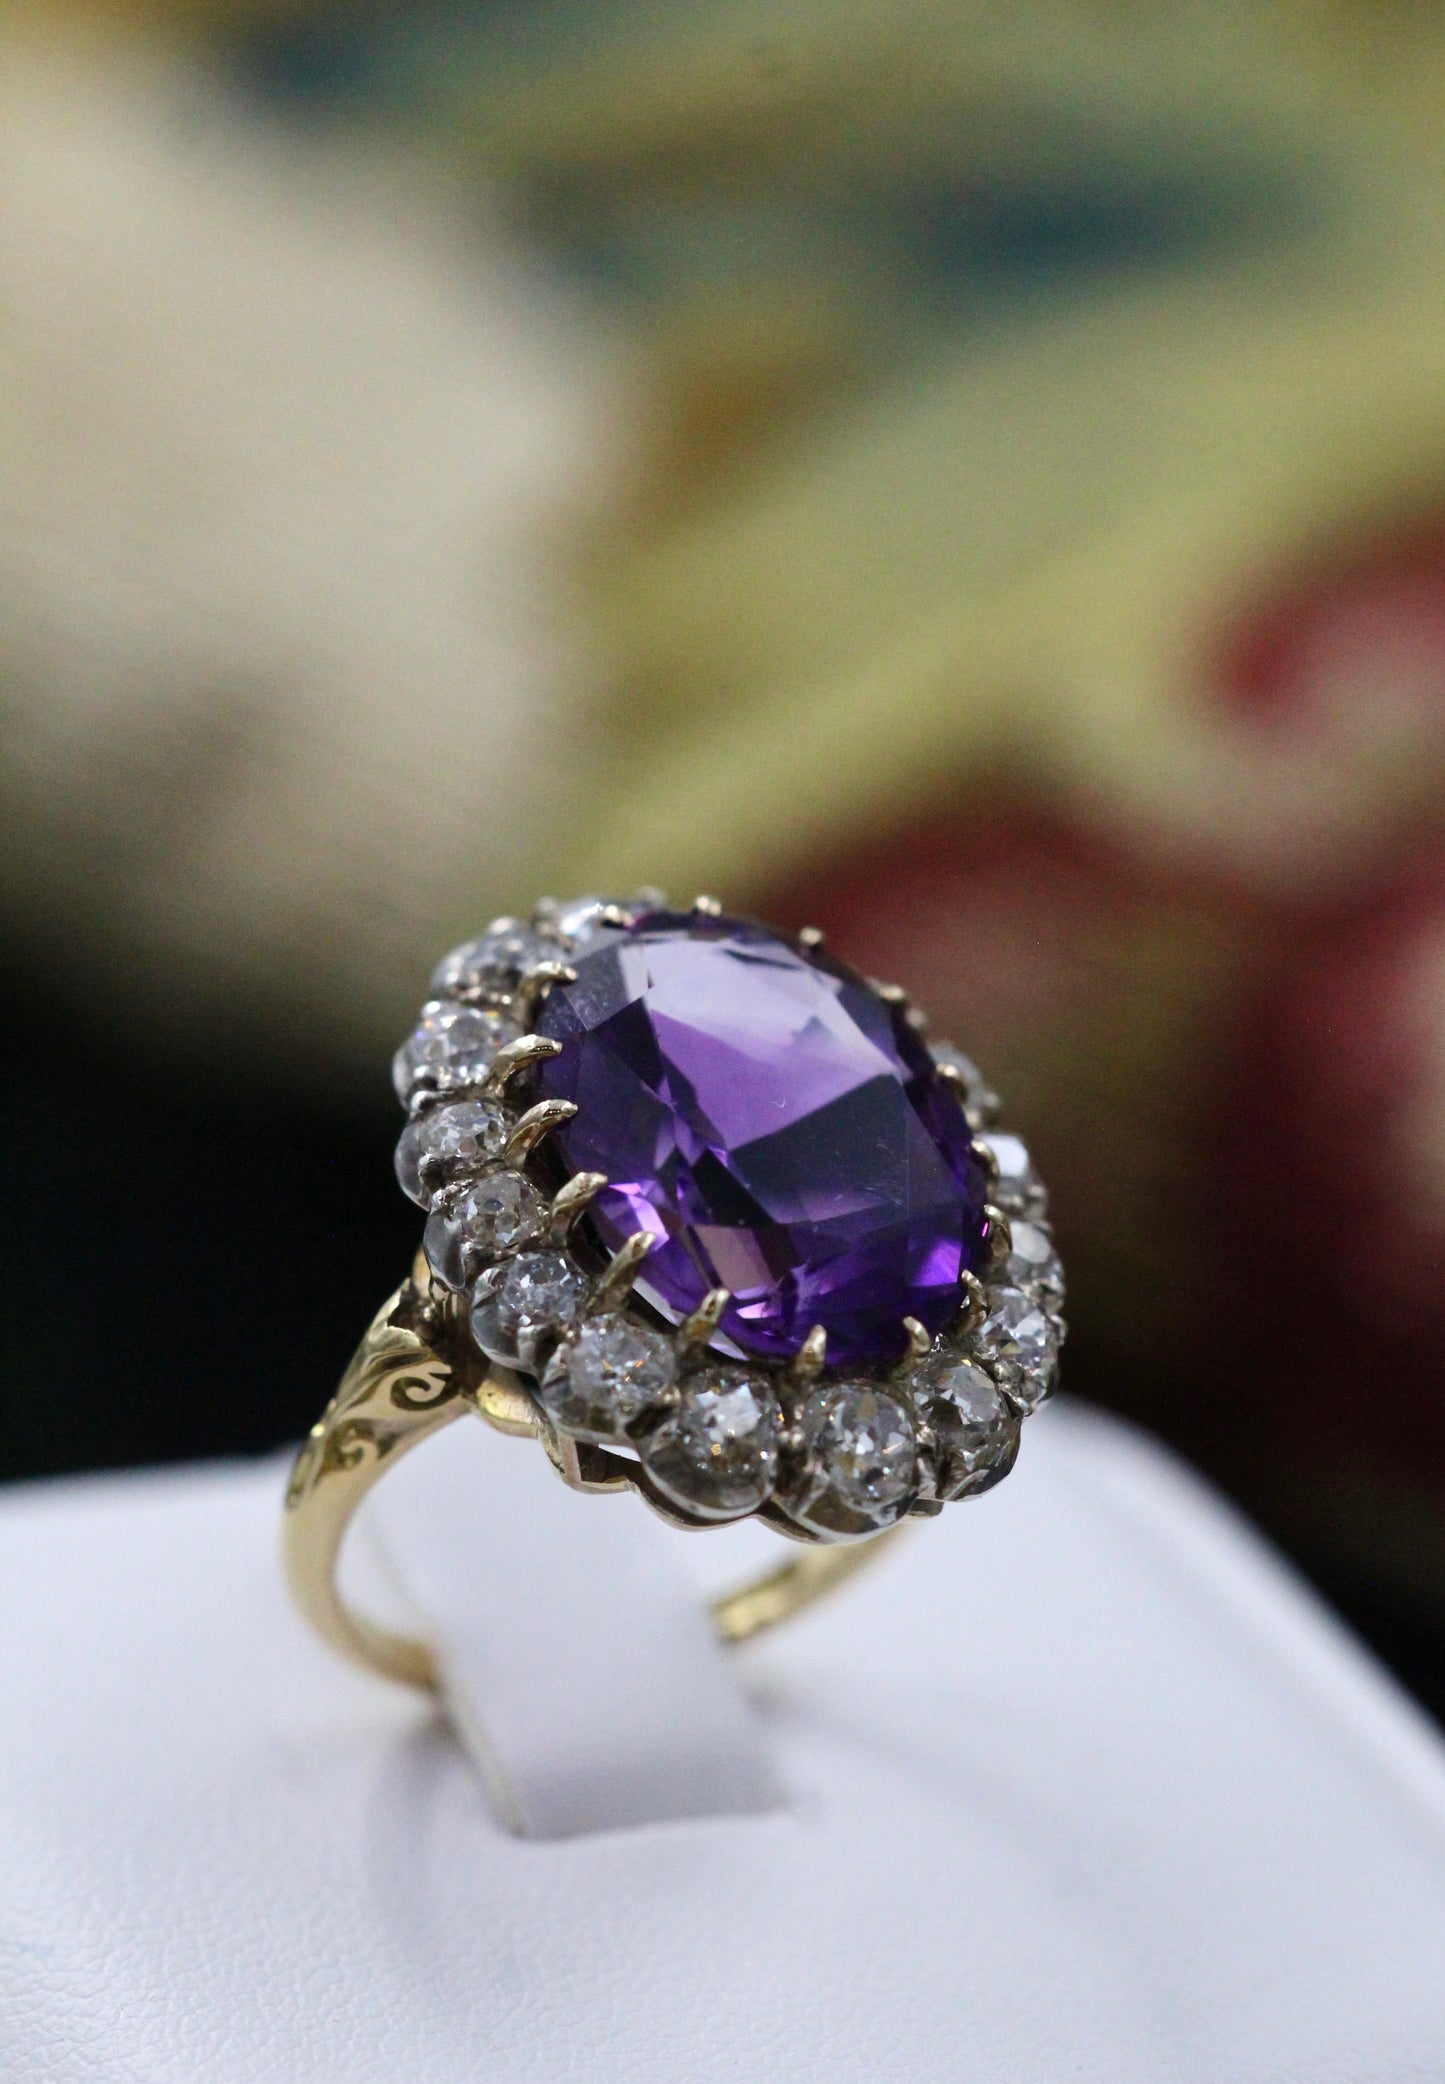 An Amethyst and Diamond Cluster Ring set with an Oval Amethyst, surrounded by 2.00 Carats of "Old Mine" Cut (Cushion), Shaped Diamonds, mounted in Silver on Gold, stamped 18 ct. Circa 1900. - Robin Haydock Antiques